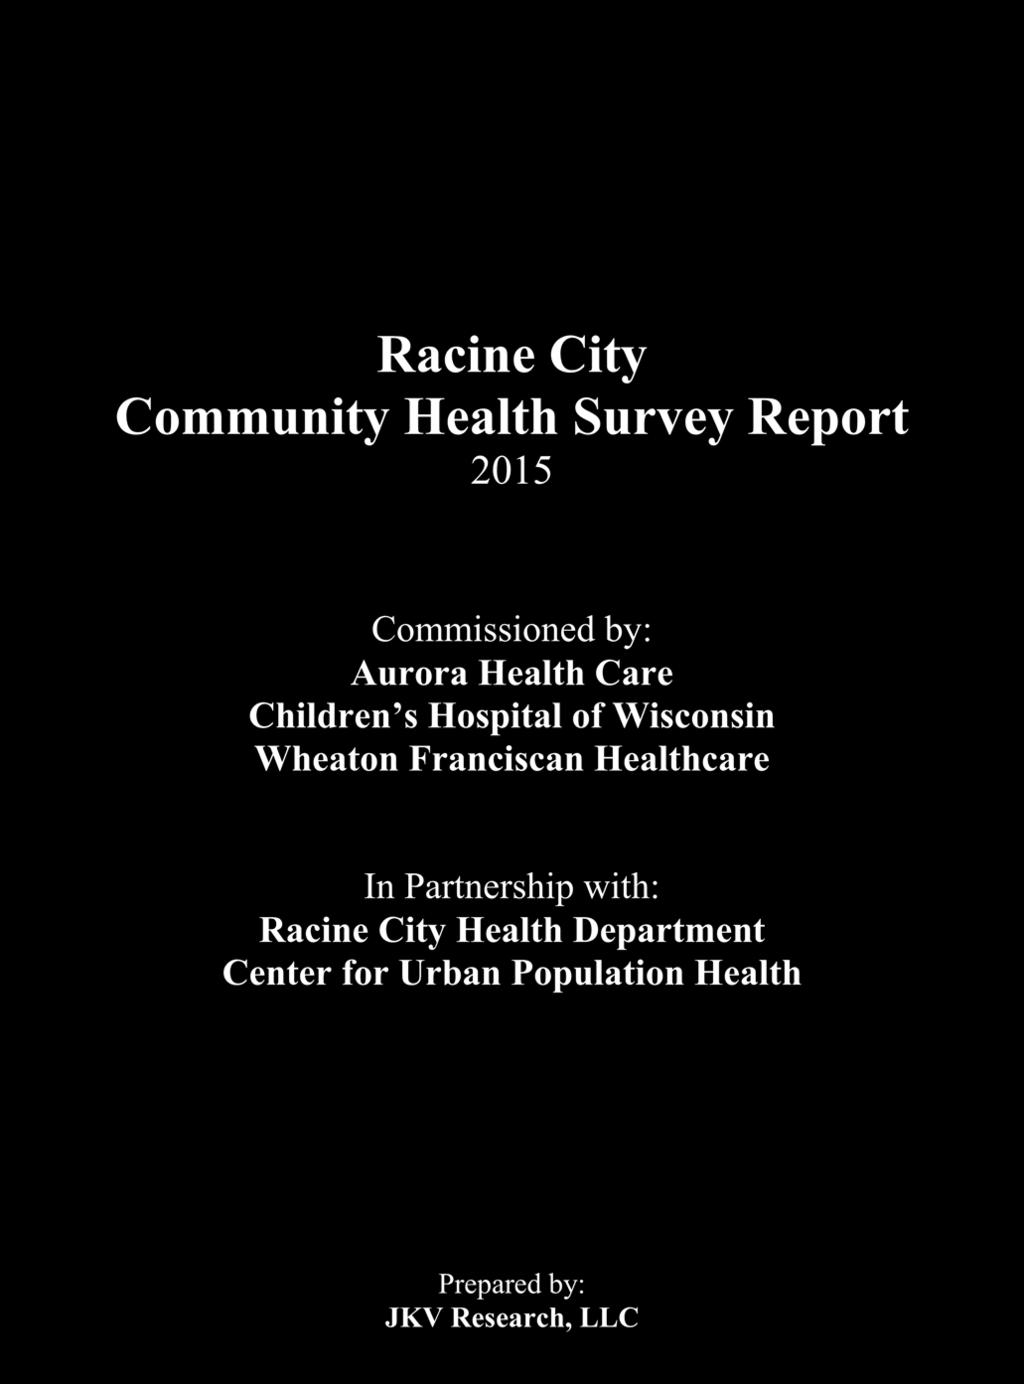 Racine City Community Health Survey Report 2015 Commissioned by: Aurora Health Care Children s Hospital of Wisconsin Wheaton